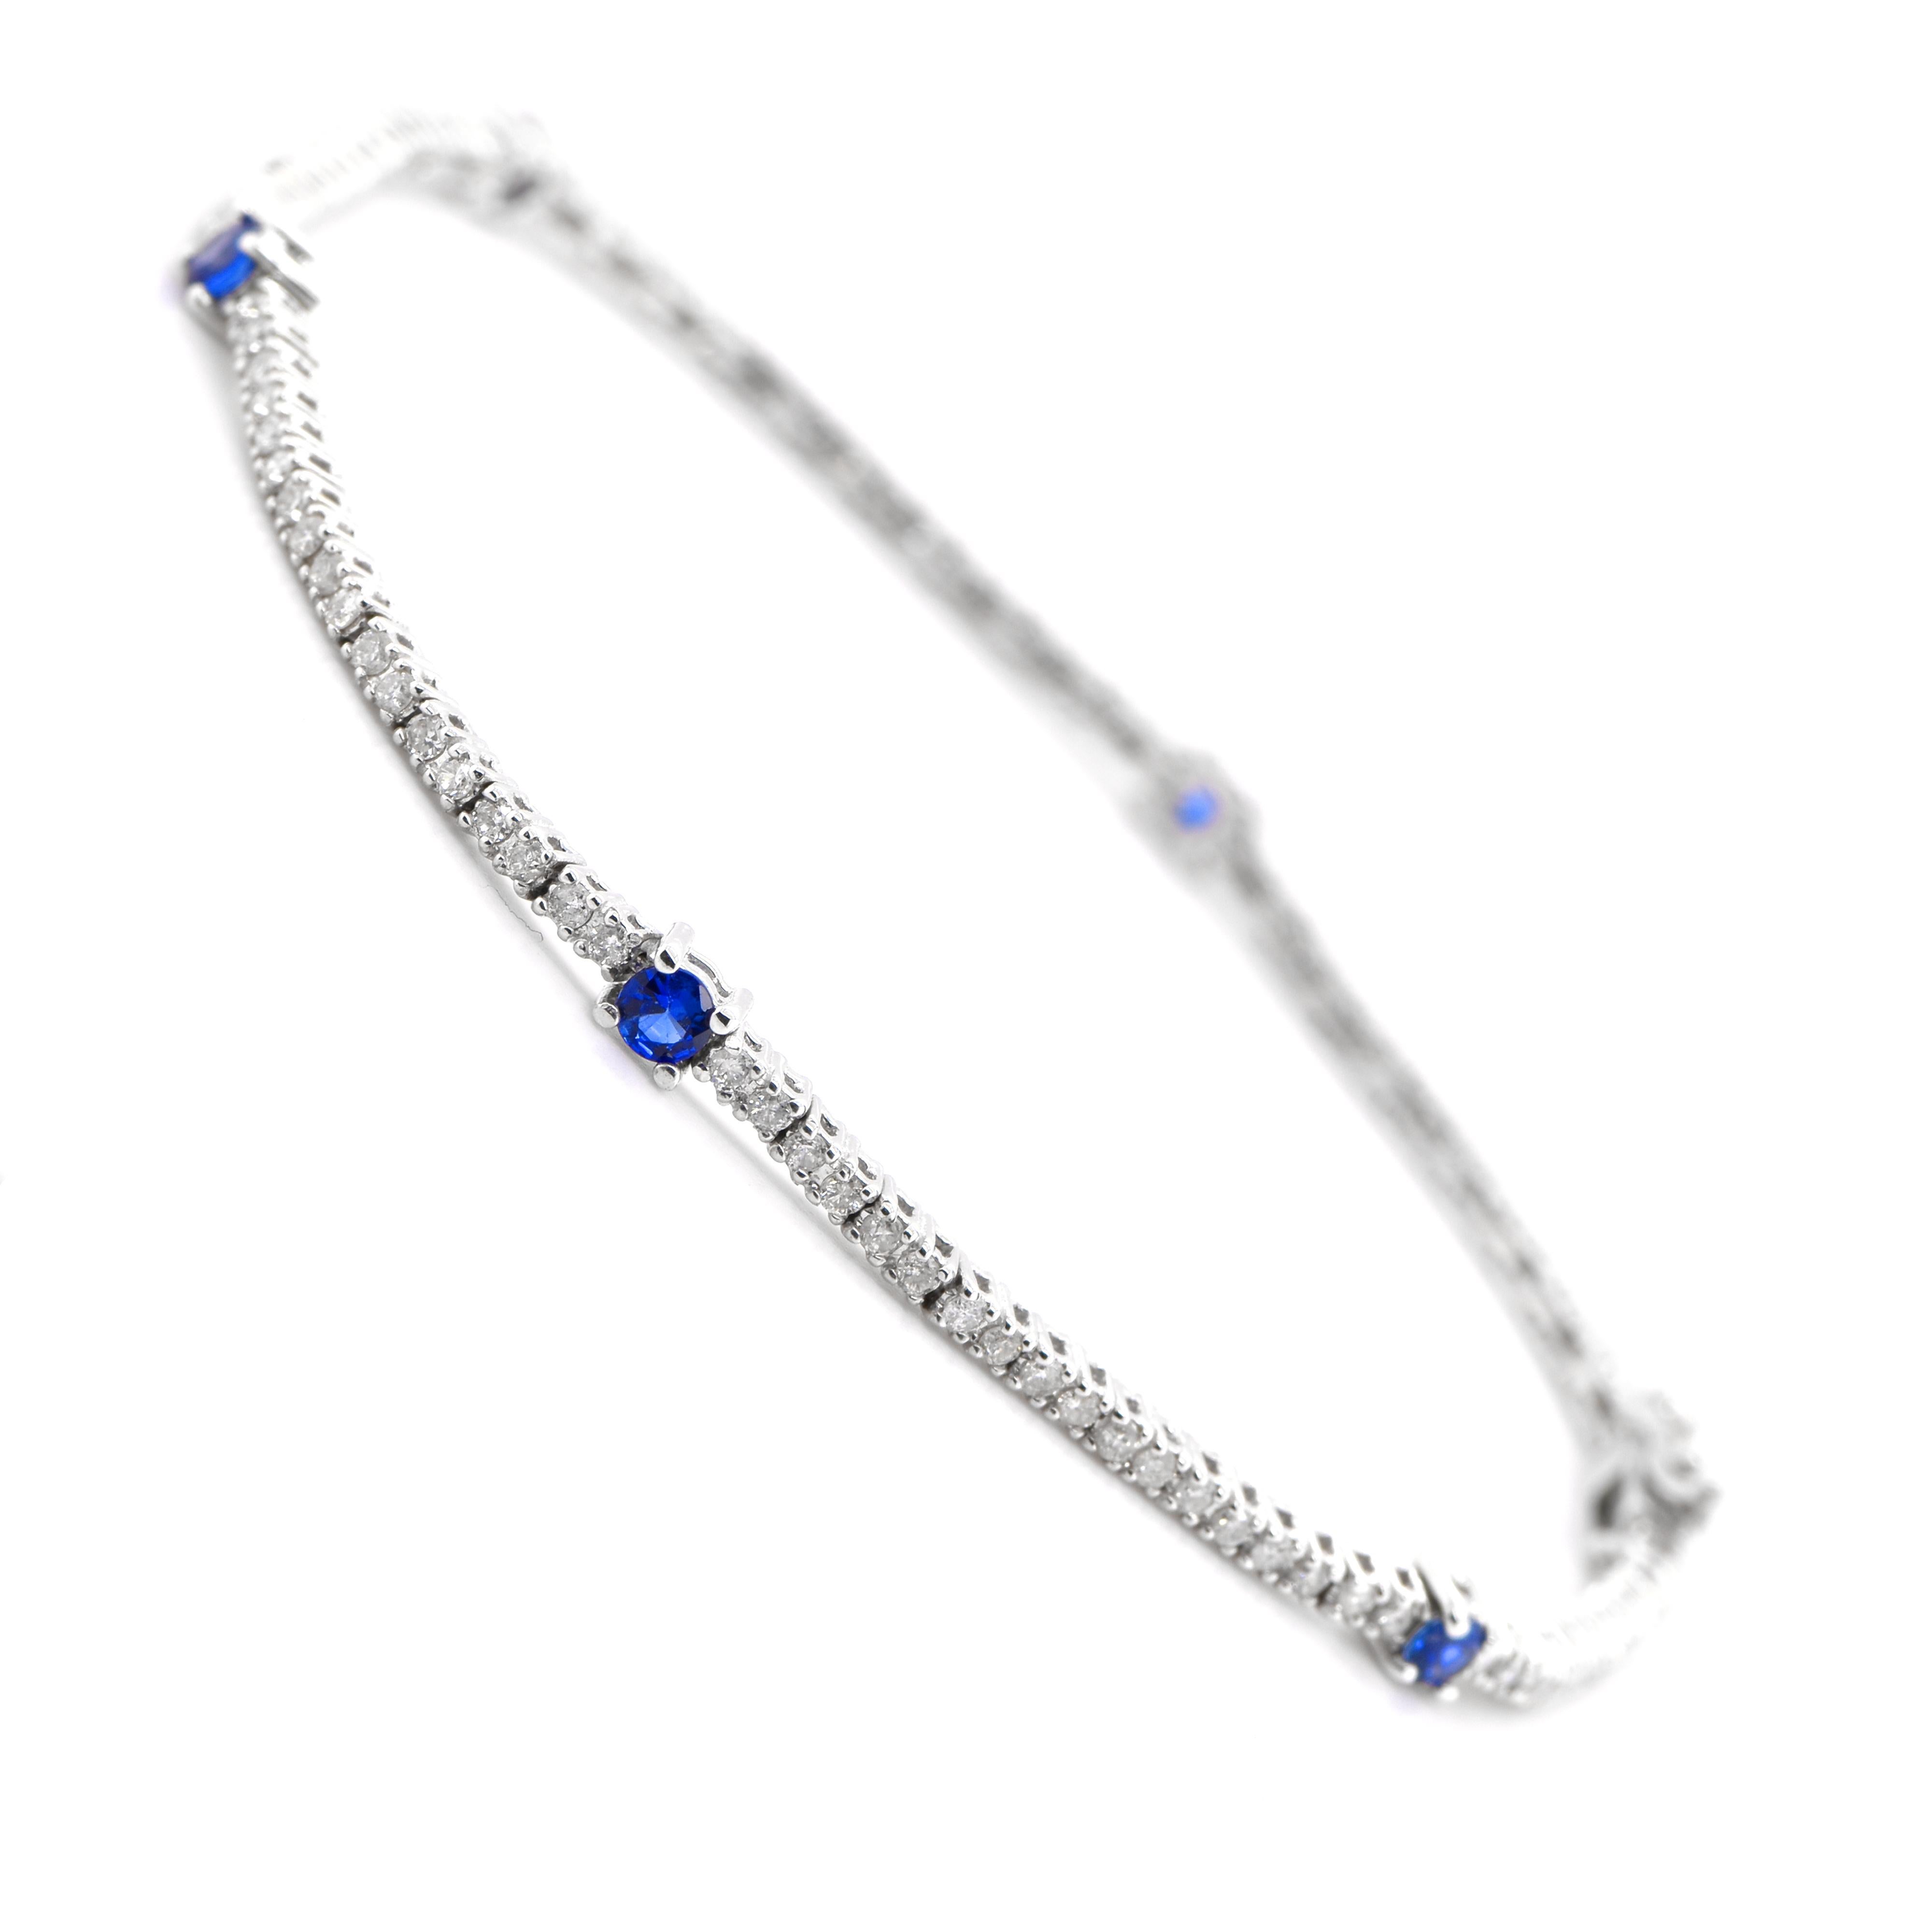 Modern 0.40 Carats Natural Sapphires and Diamonds Tennis Bracelet Set in 18K White Gold